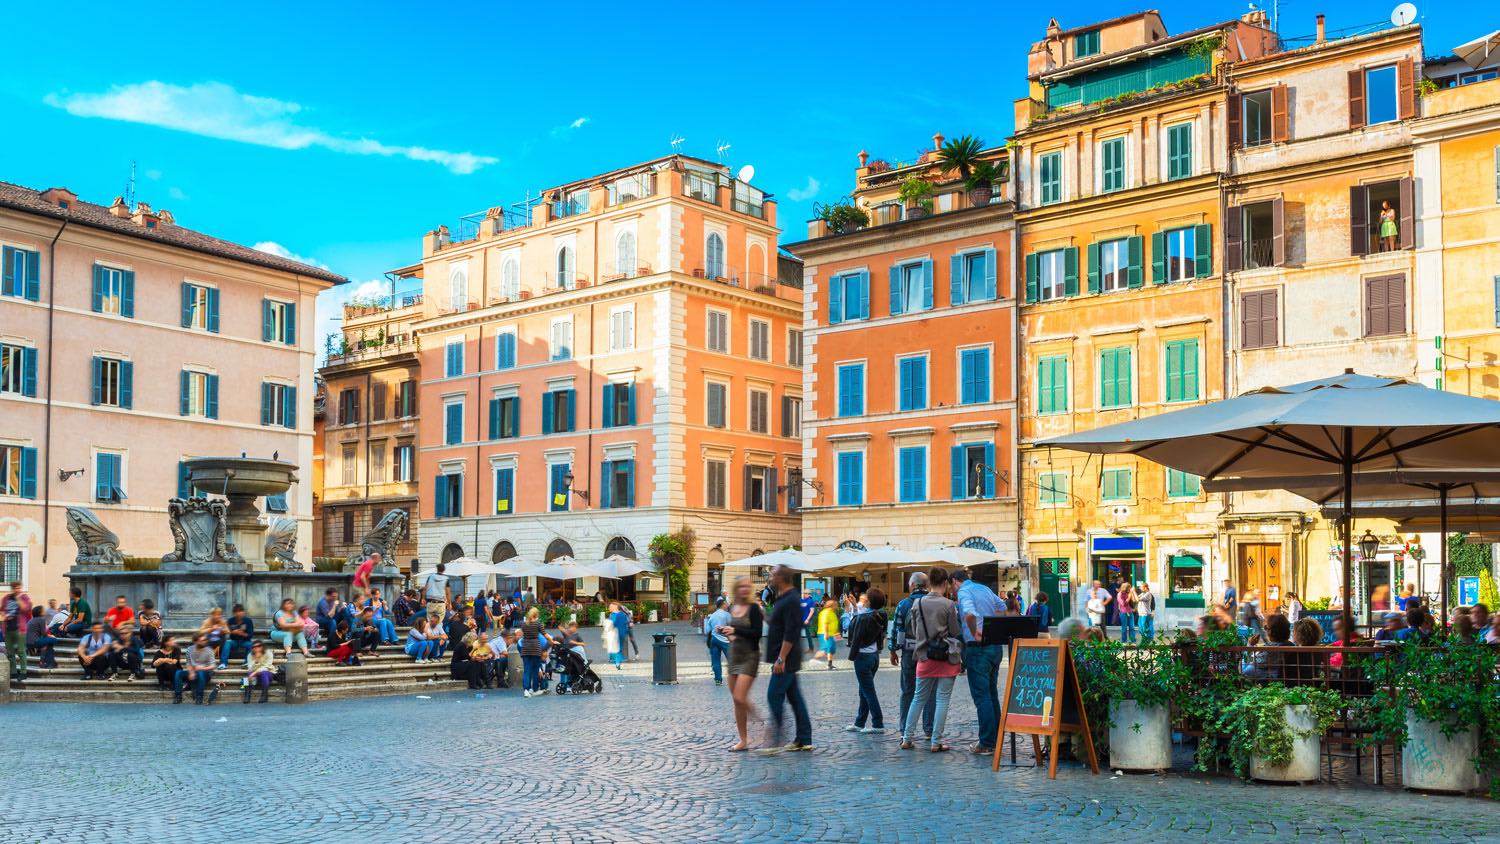 Trastevere: This Bohemian Neighbourhood in Rome Is the Foodie Destination You Need to Visit